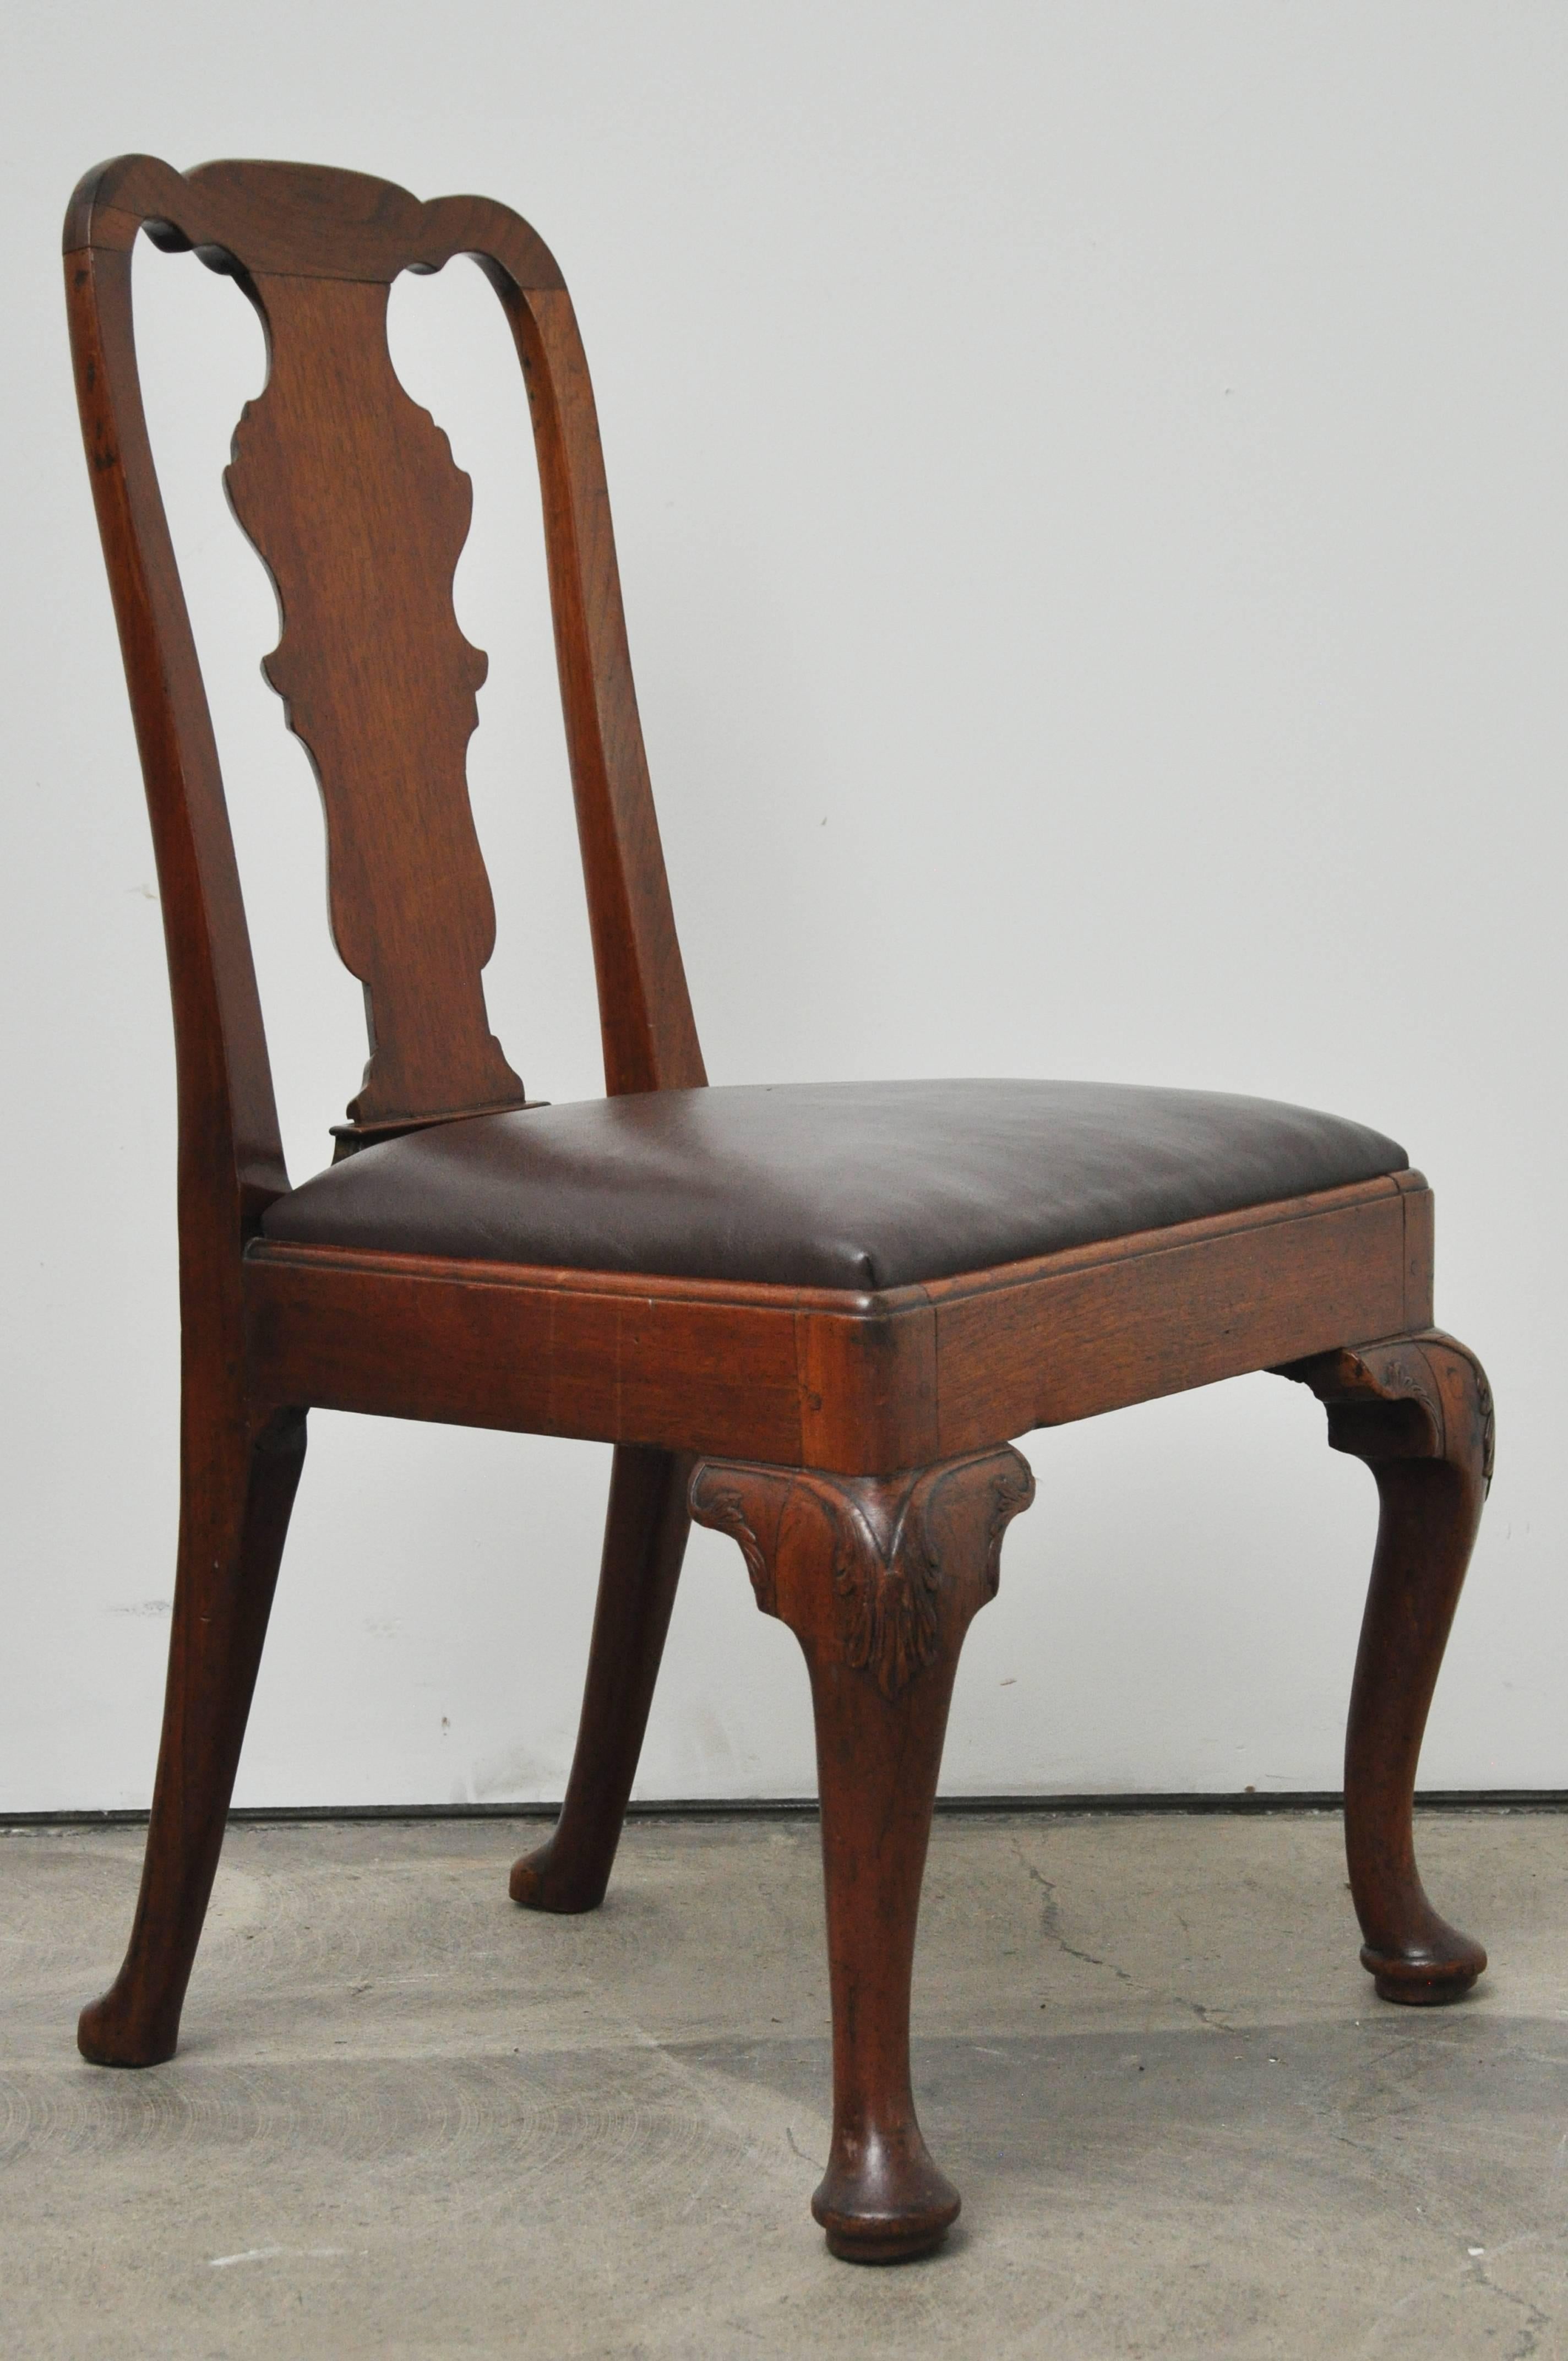 Queen Anne style chair. Measures: Seat height 19.5.